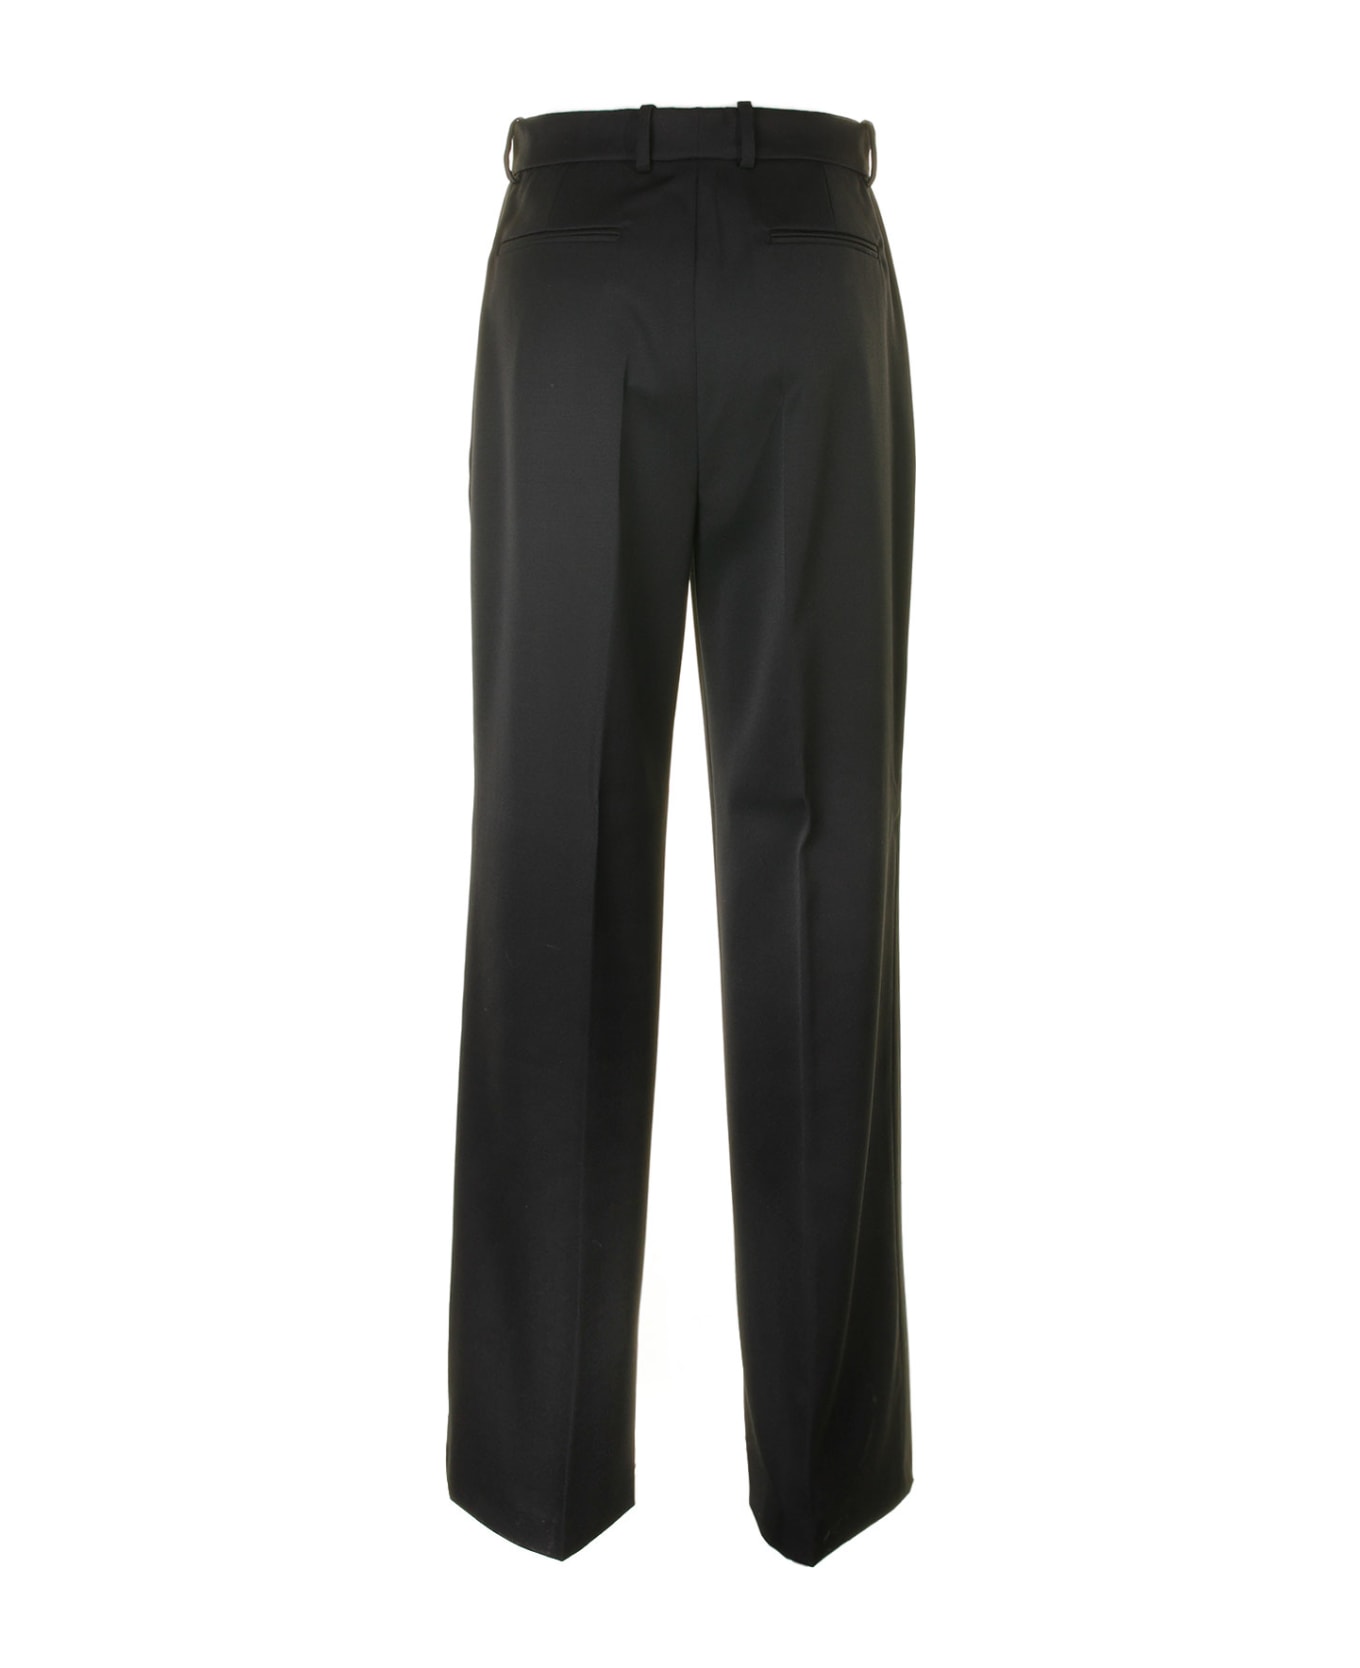 Lanvin High-waisted Wool Trousers - BLACK